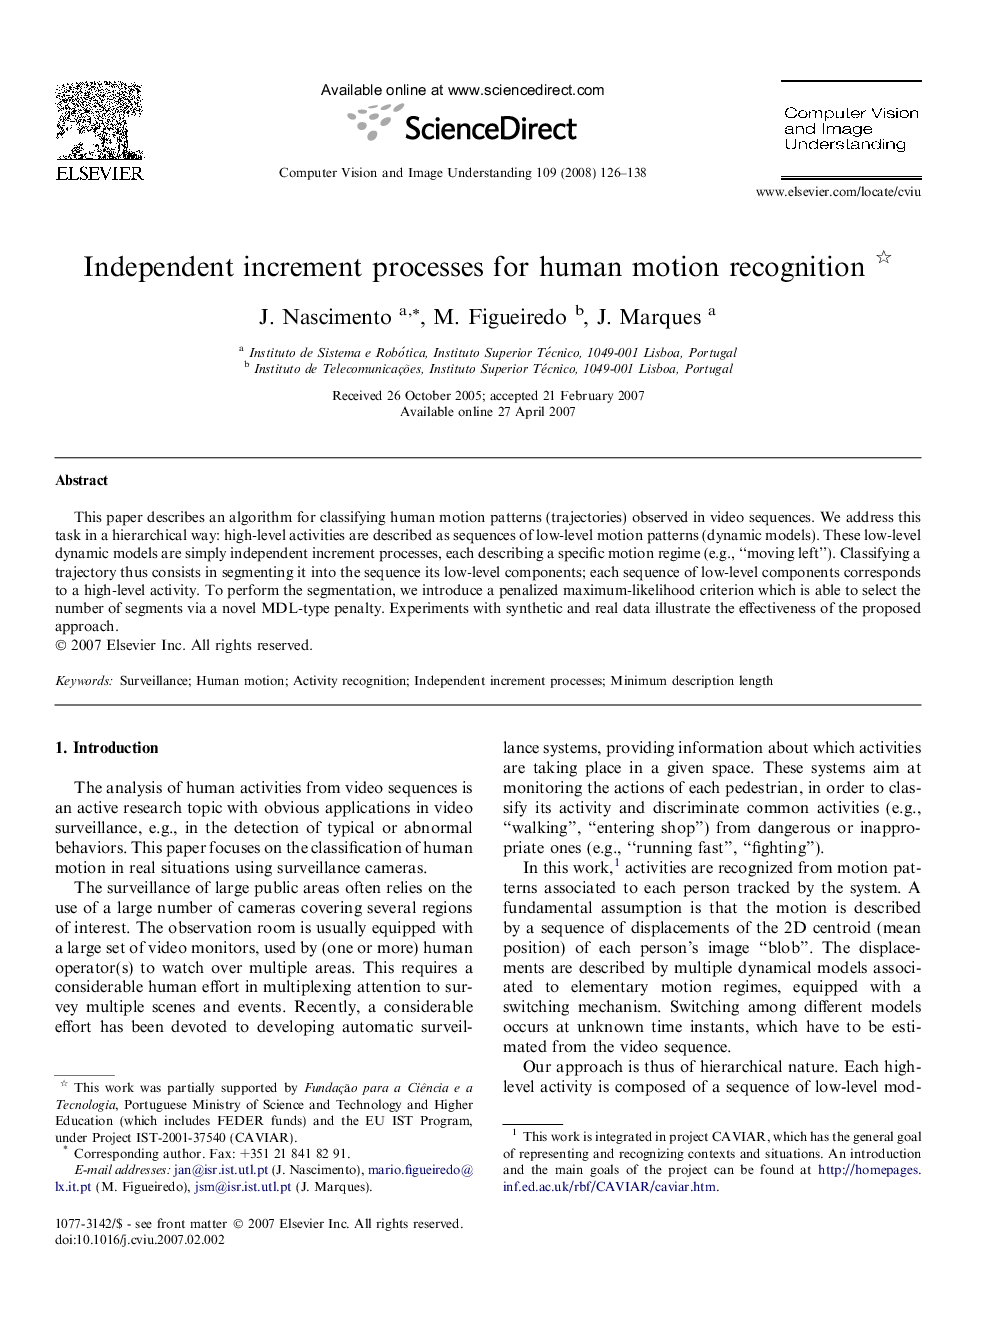 Independent increment processes for human motion recognition